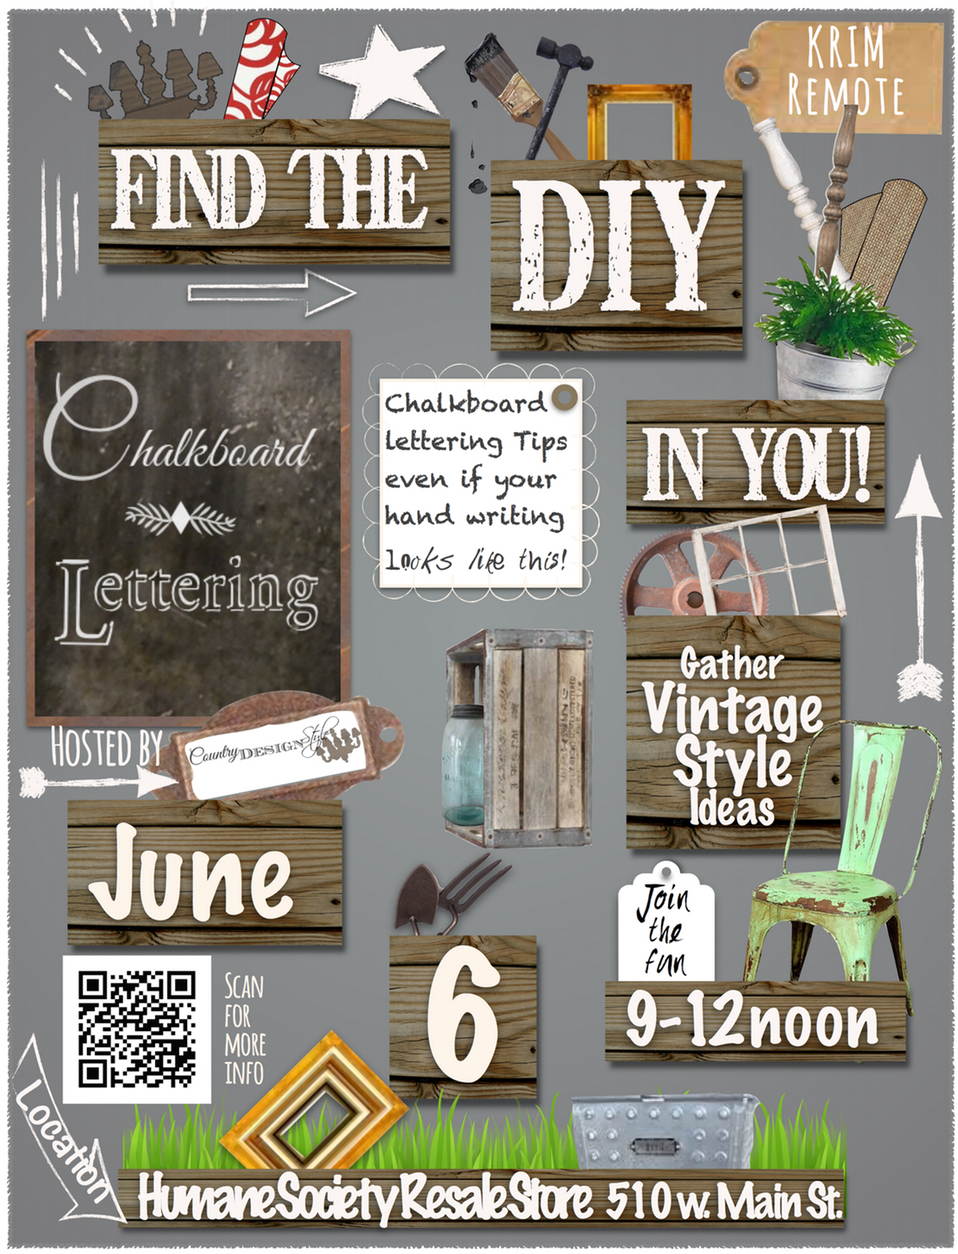 My local DIY event where we learned tips and trick for chalkboard lettering and ideas for thrift decorating and finds. Country Design Style